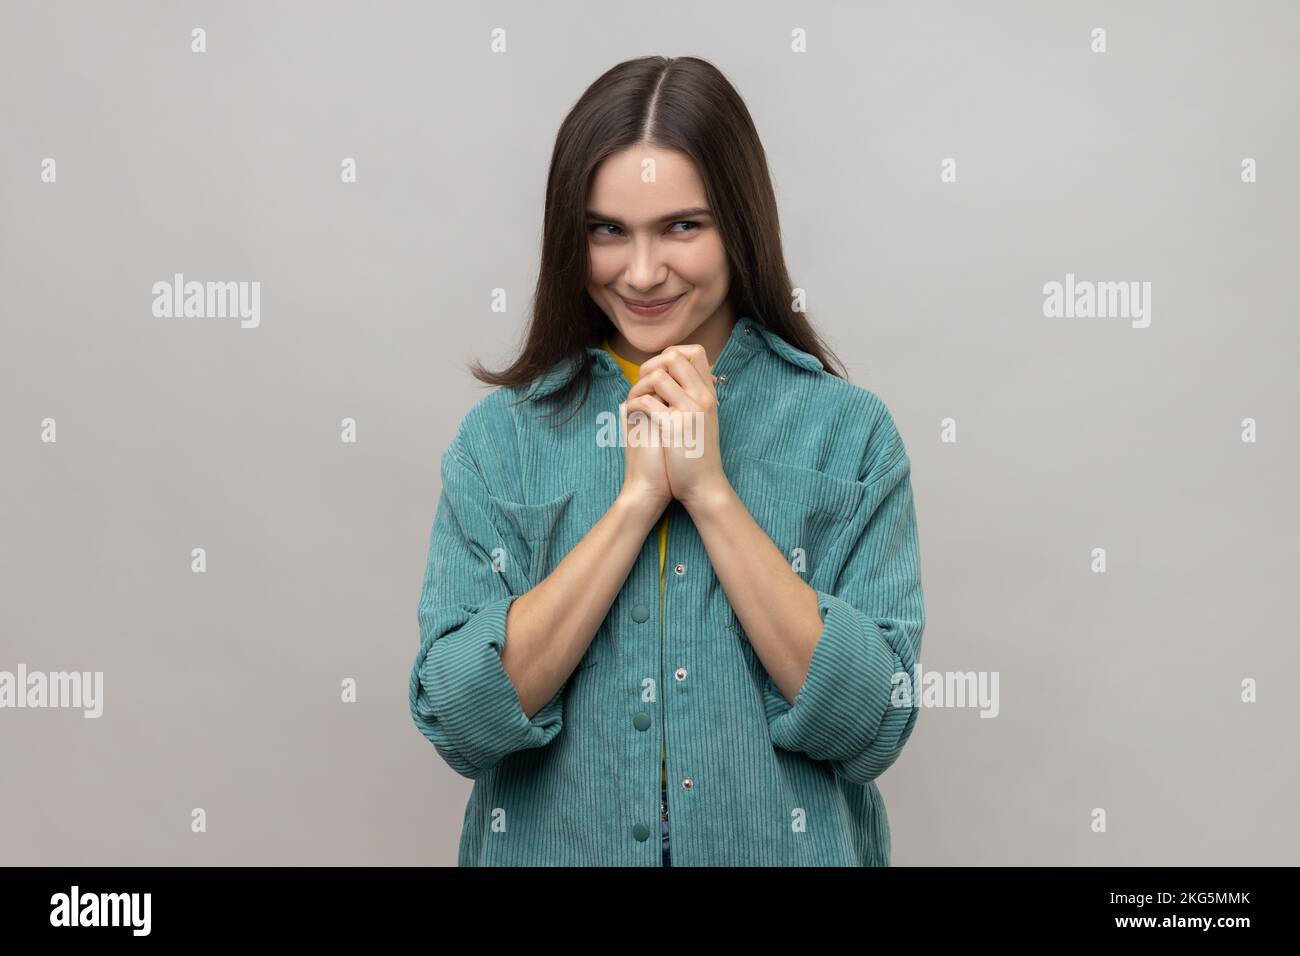 Devious cunning young woman with dark hair clasping hands and smirking mysteriously, scheming cheats, evil prank, wearing casual style jacket. Indoor studio shot isolated on gray background. Stock Photo